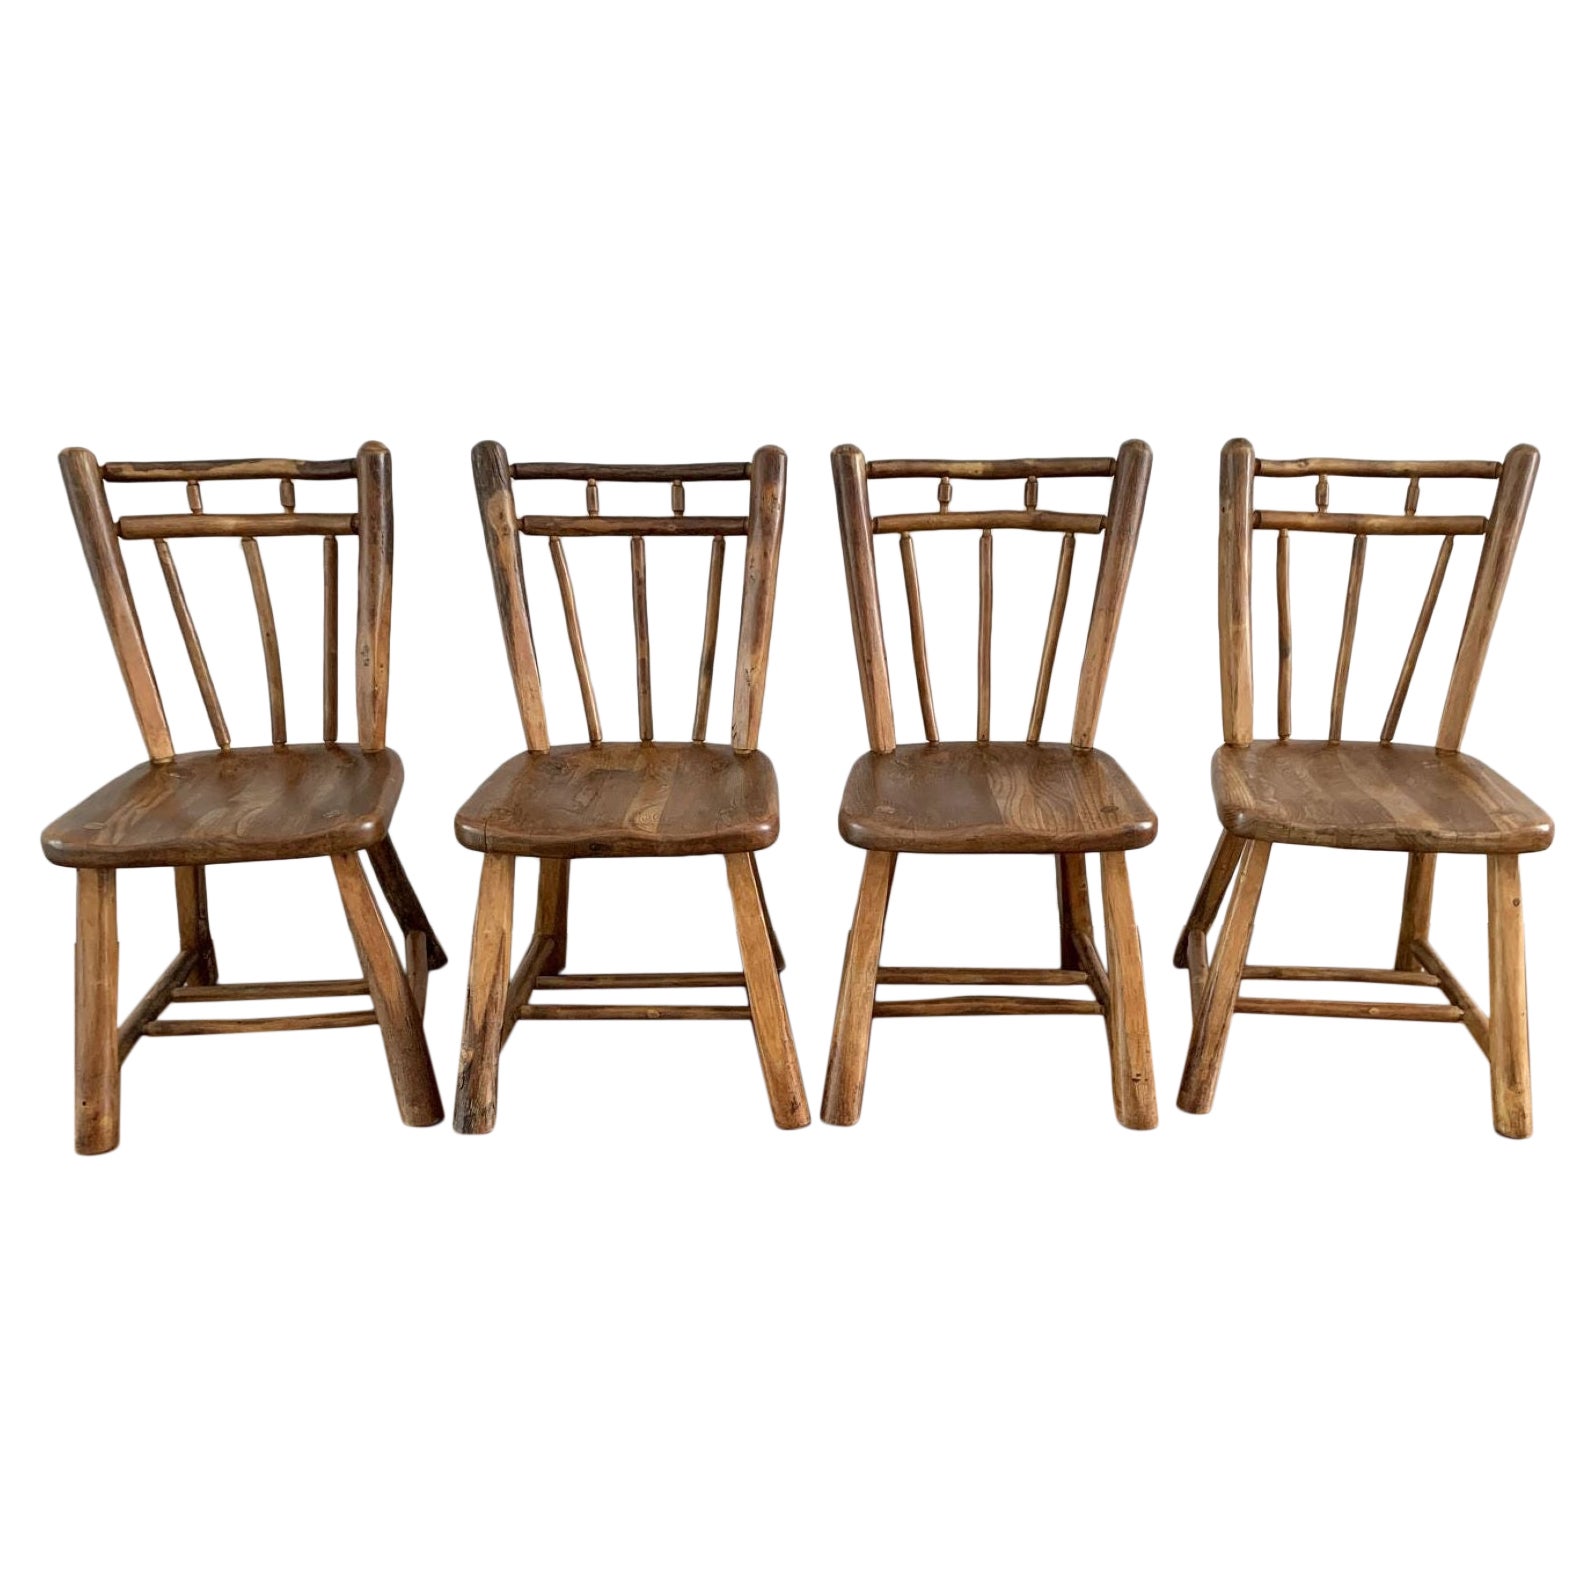 Set of Four Old Hickory Plain Spindle Back Chairs